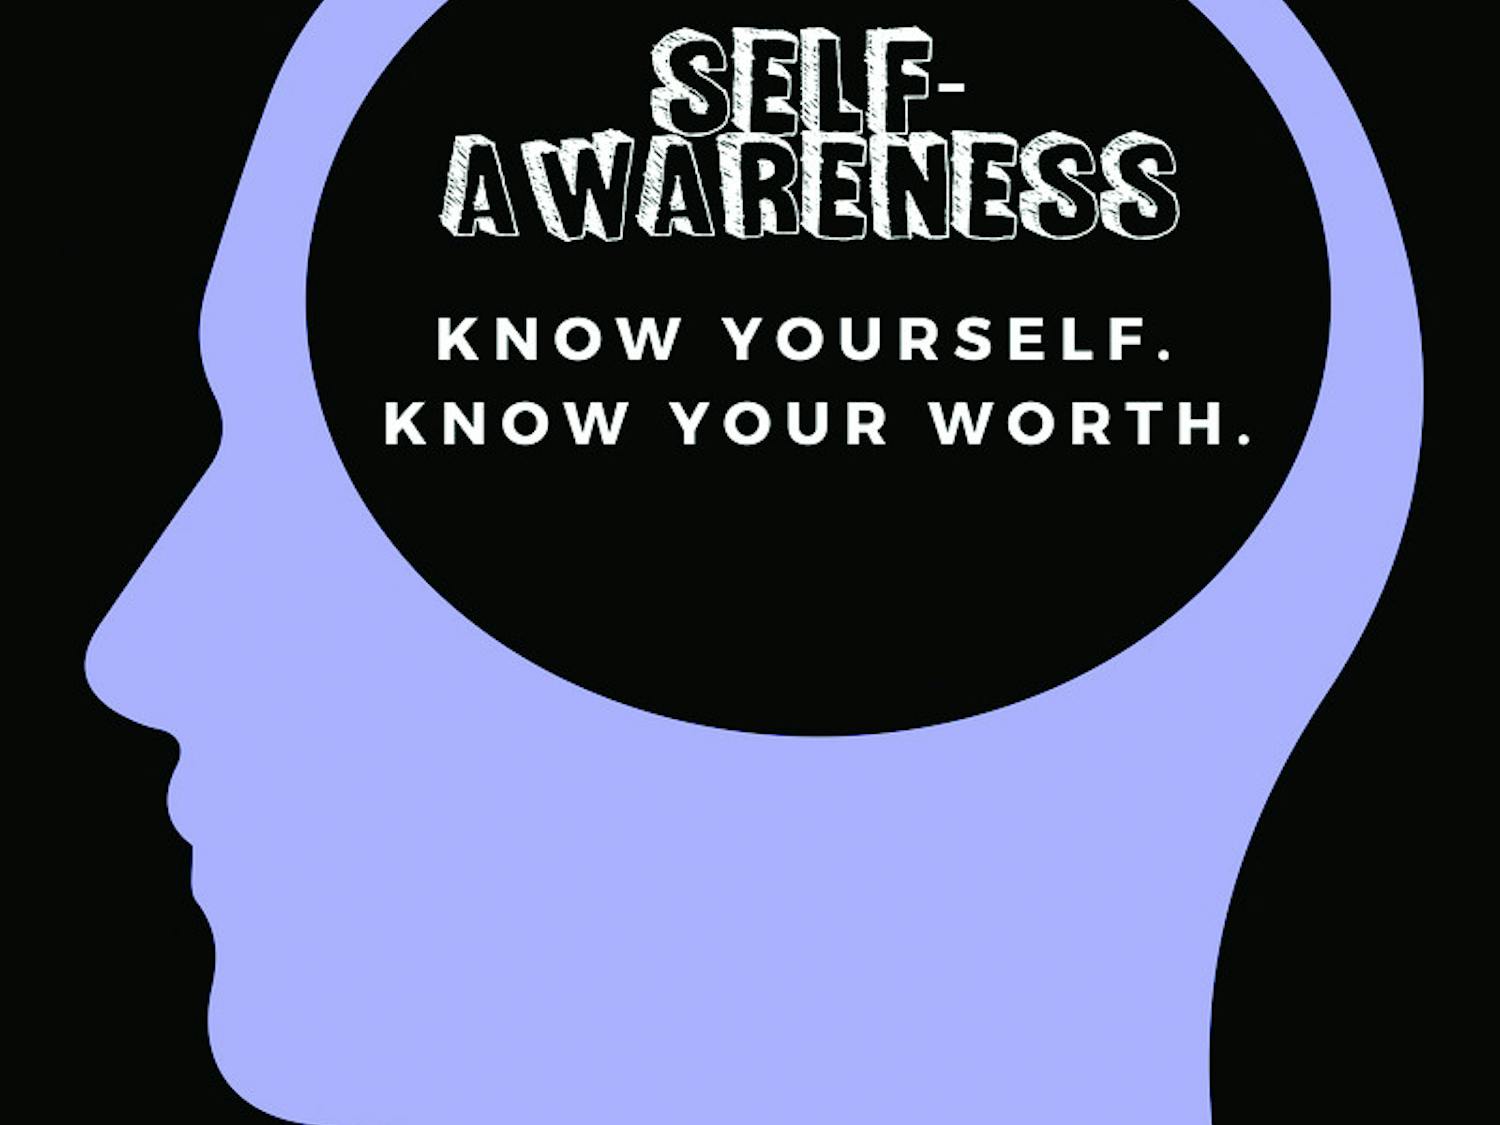 know-yourself.-know-Your-worth.